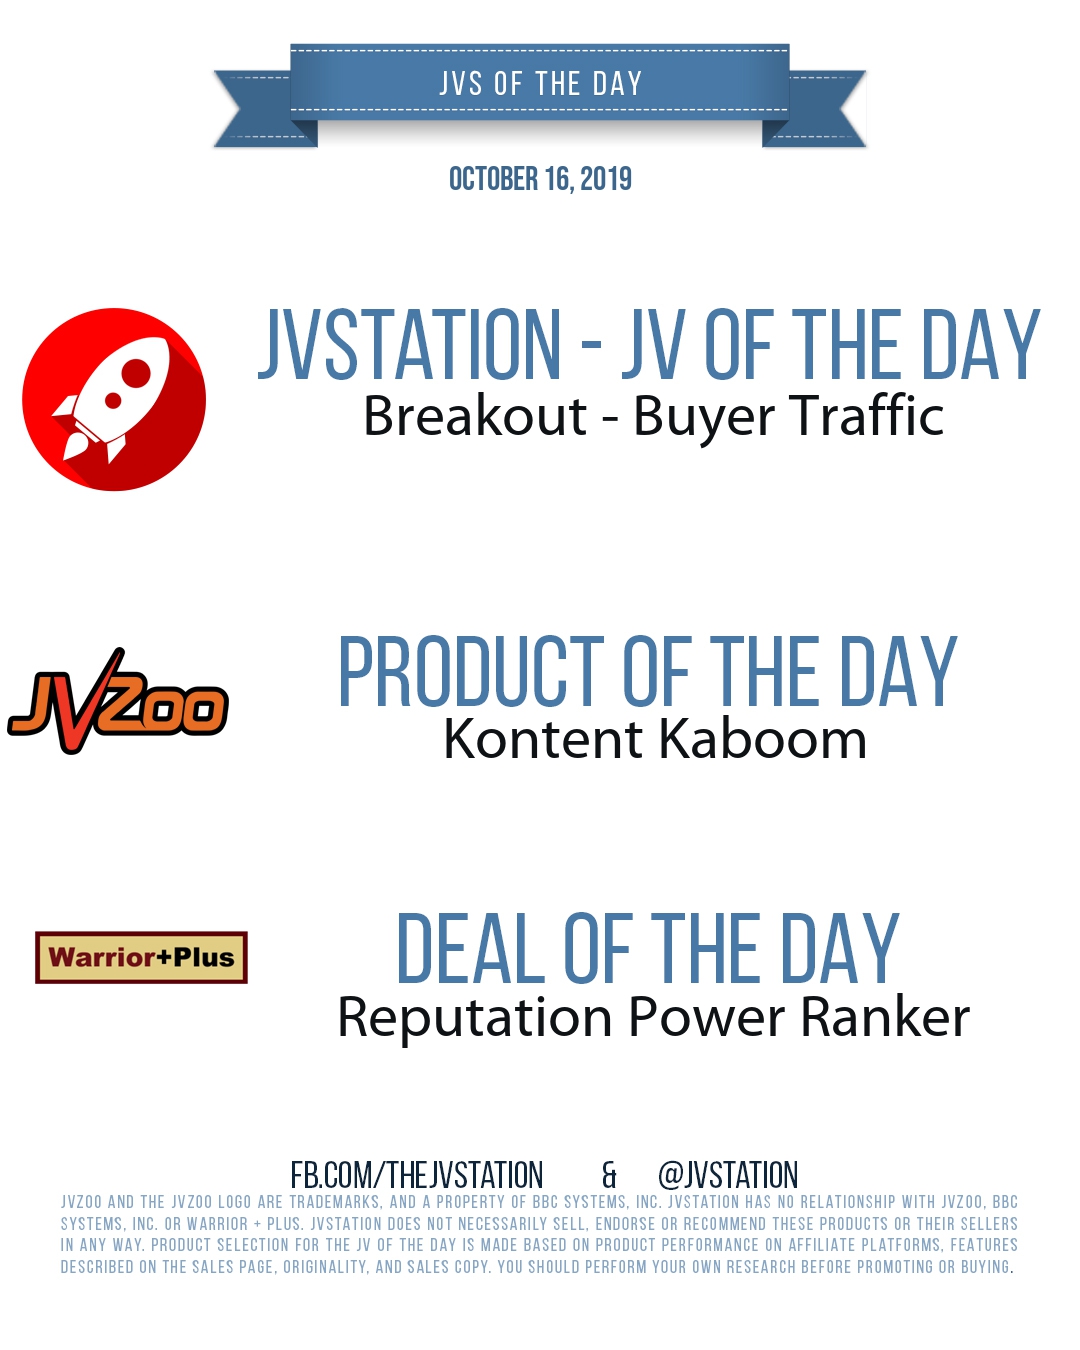 JVs of the day - October 16, 2019